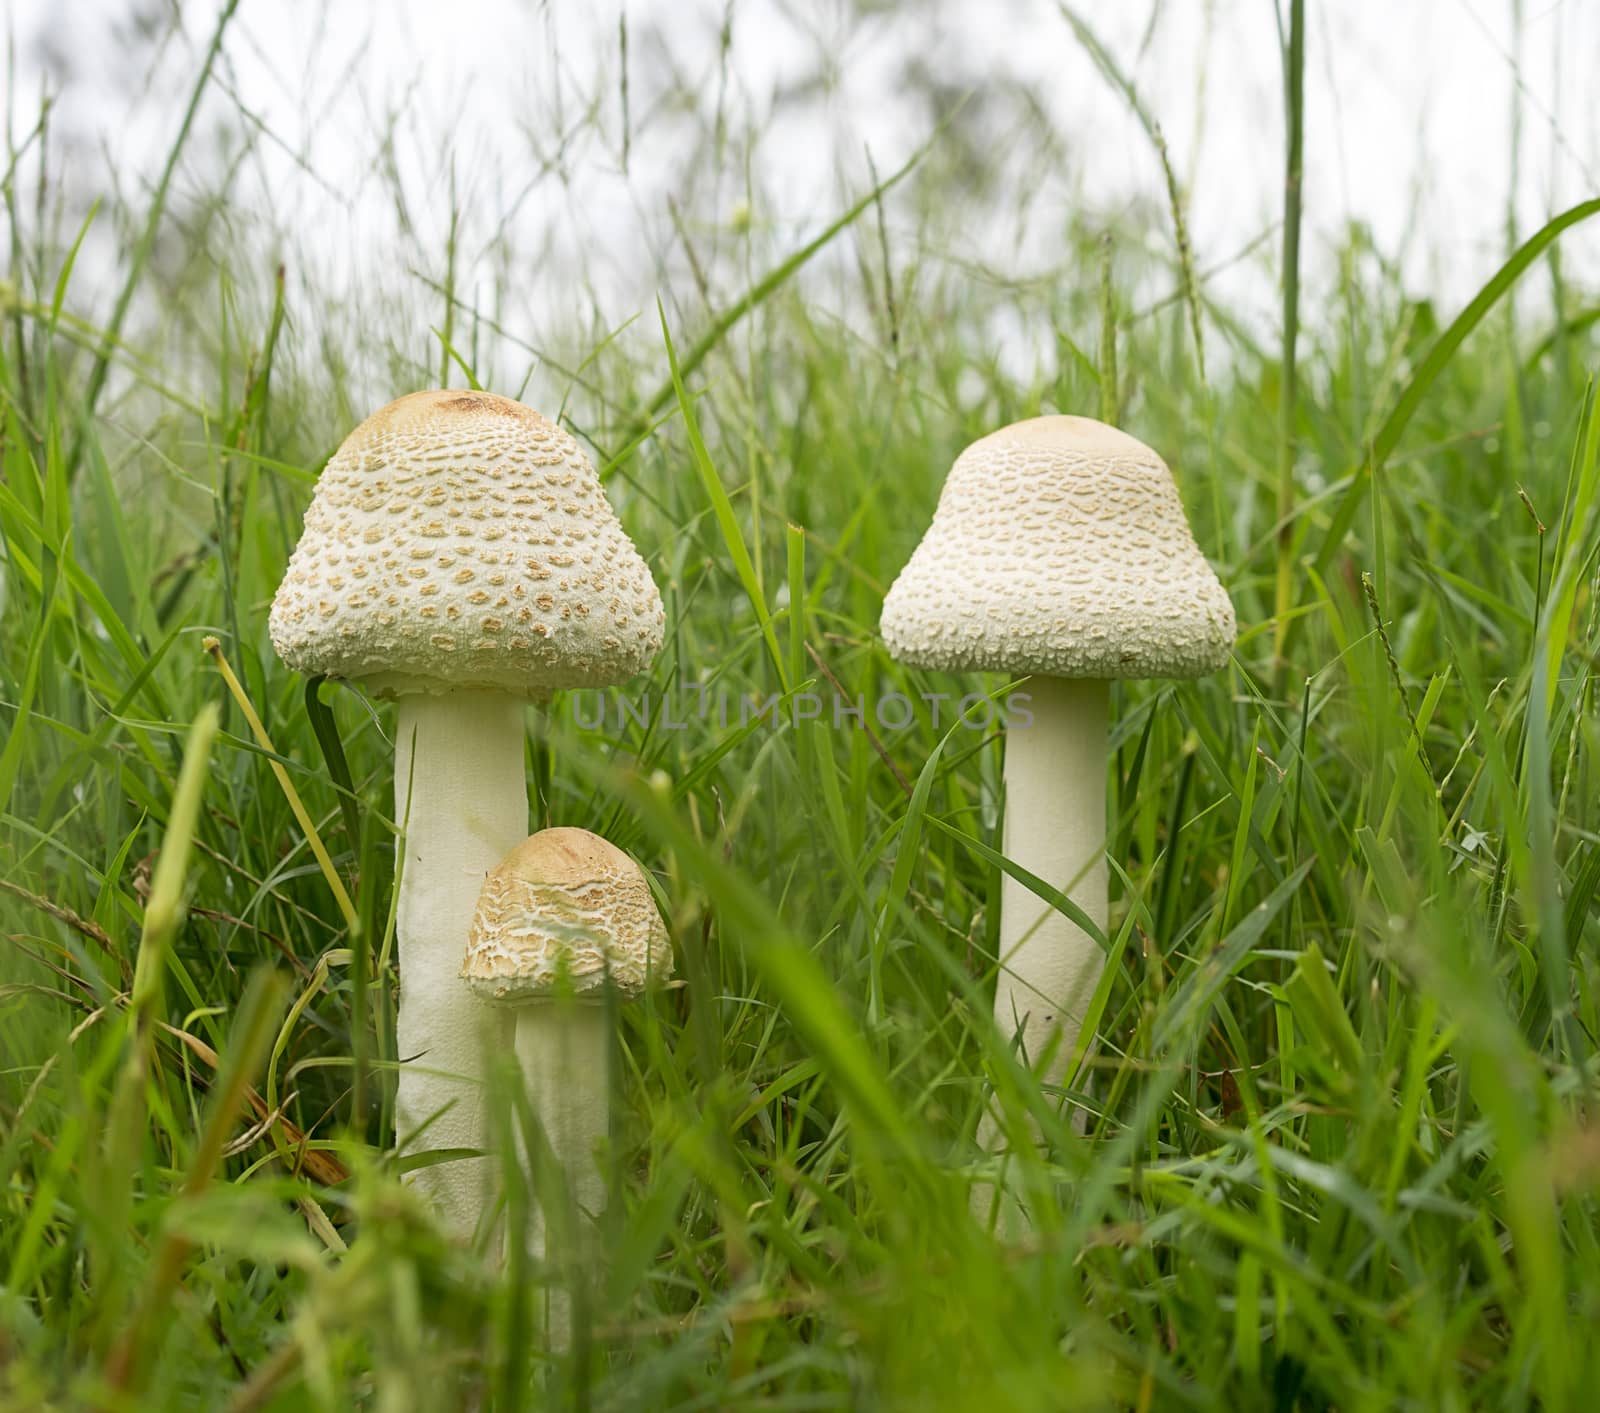 Australia three young parasol mushrooms growing in wet, long green grass